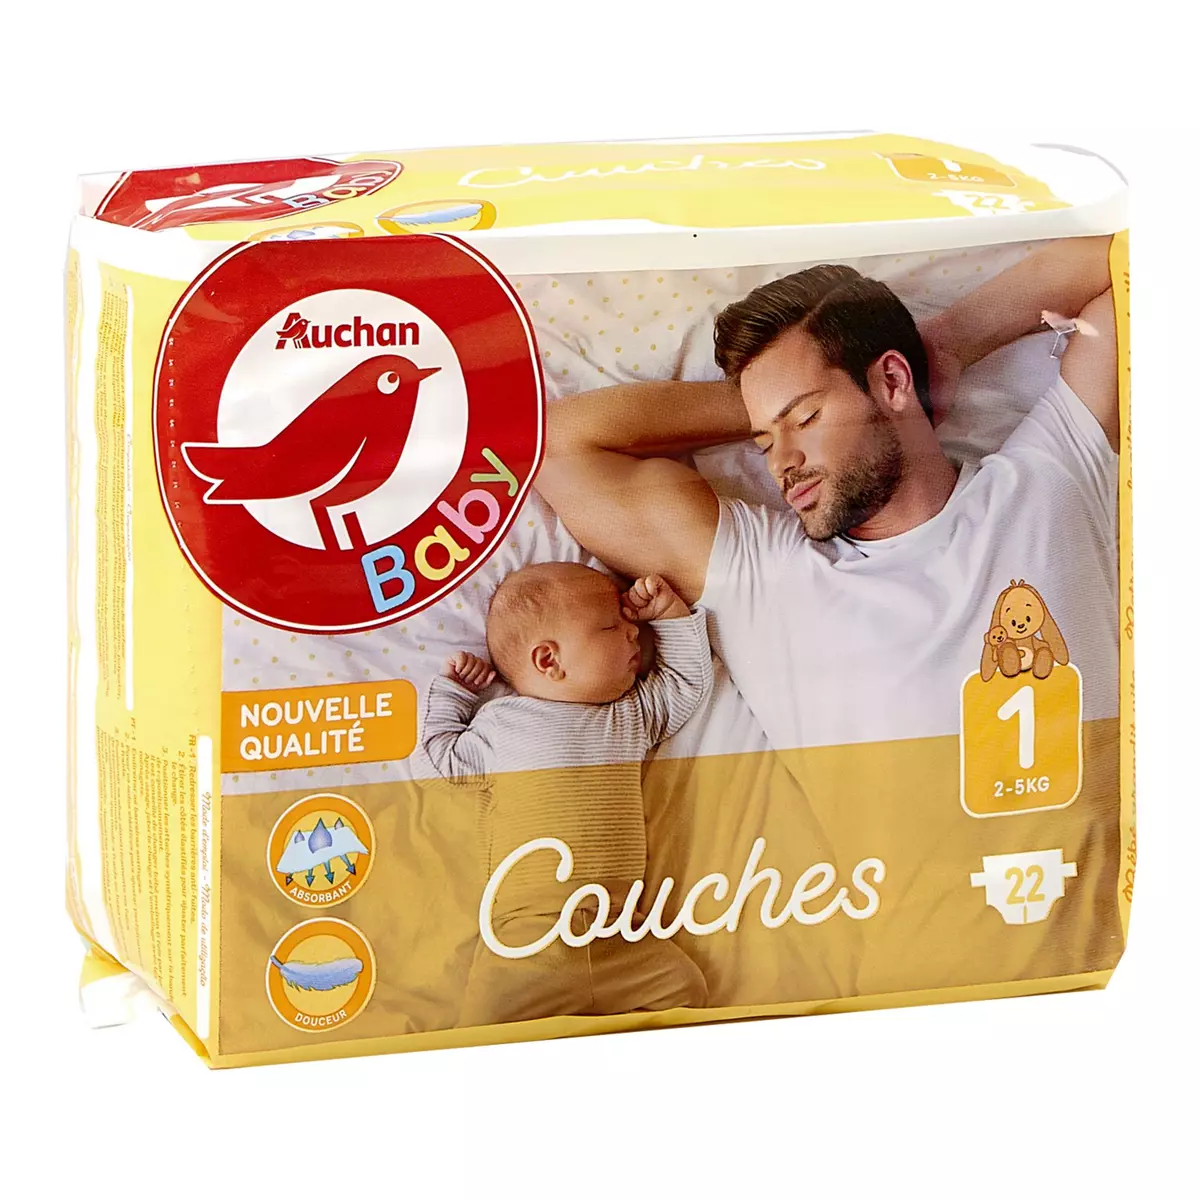 PAMPERS Harmonie Couches Taille 1 (2-5kg)